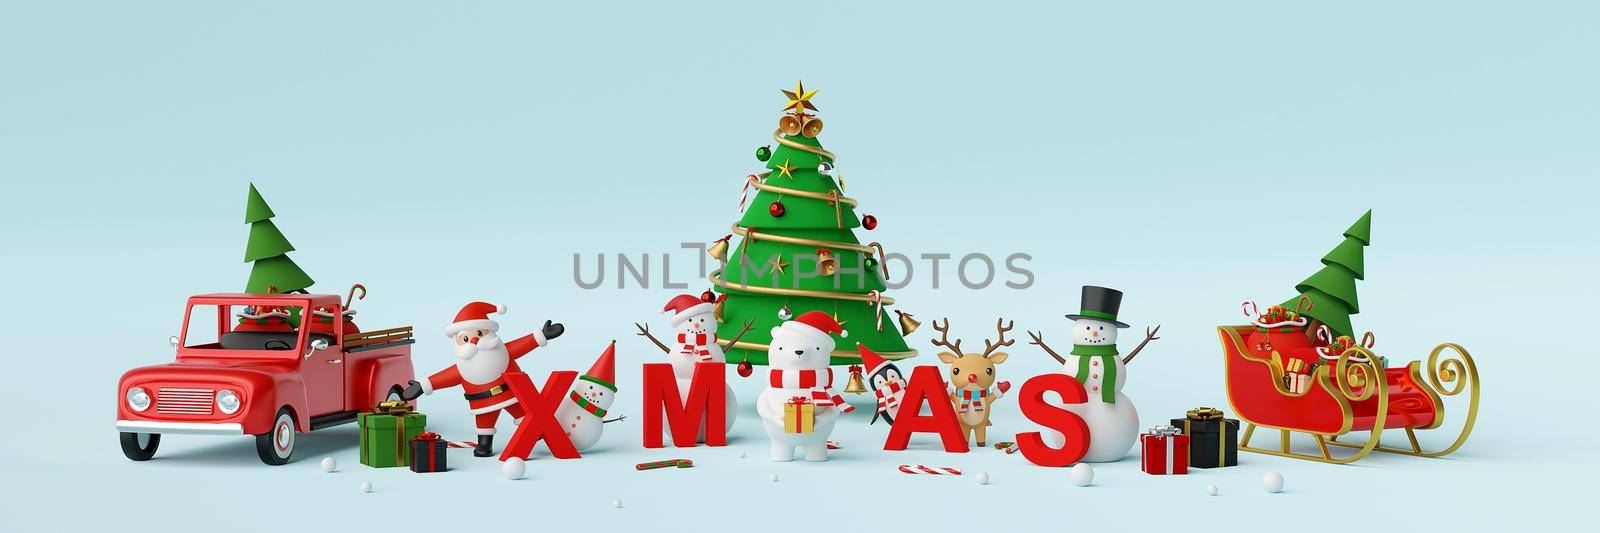 Merry Christmas and Happy New Year, Banner background of Santa Claus and Christmas character with letters XMAS, 3d rendering